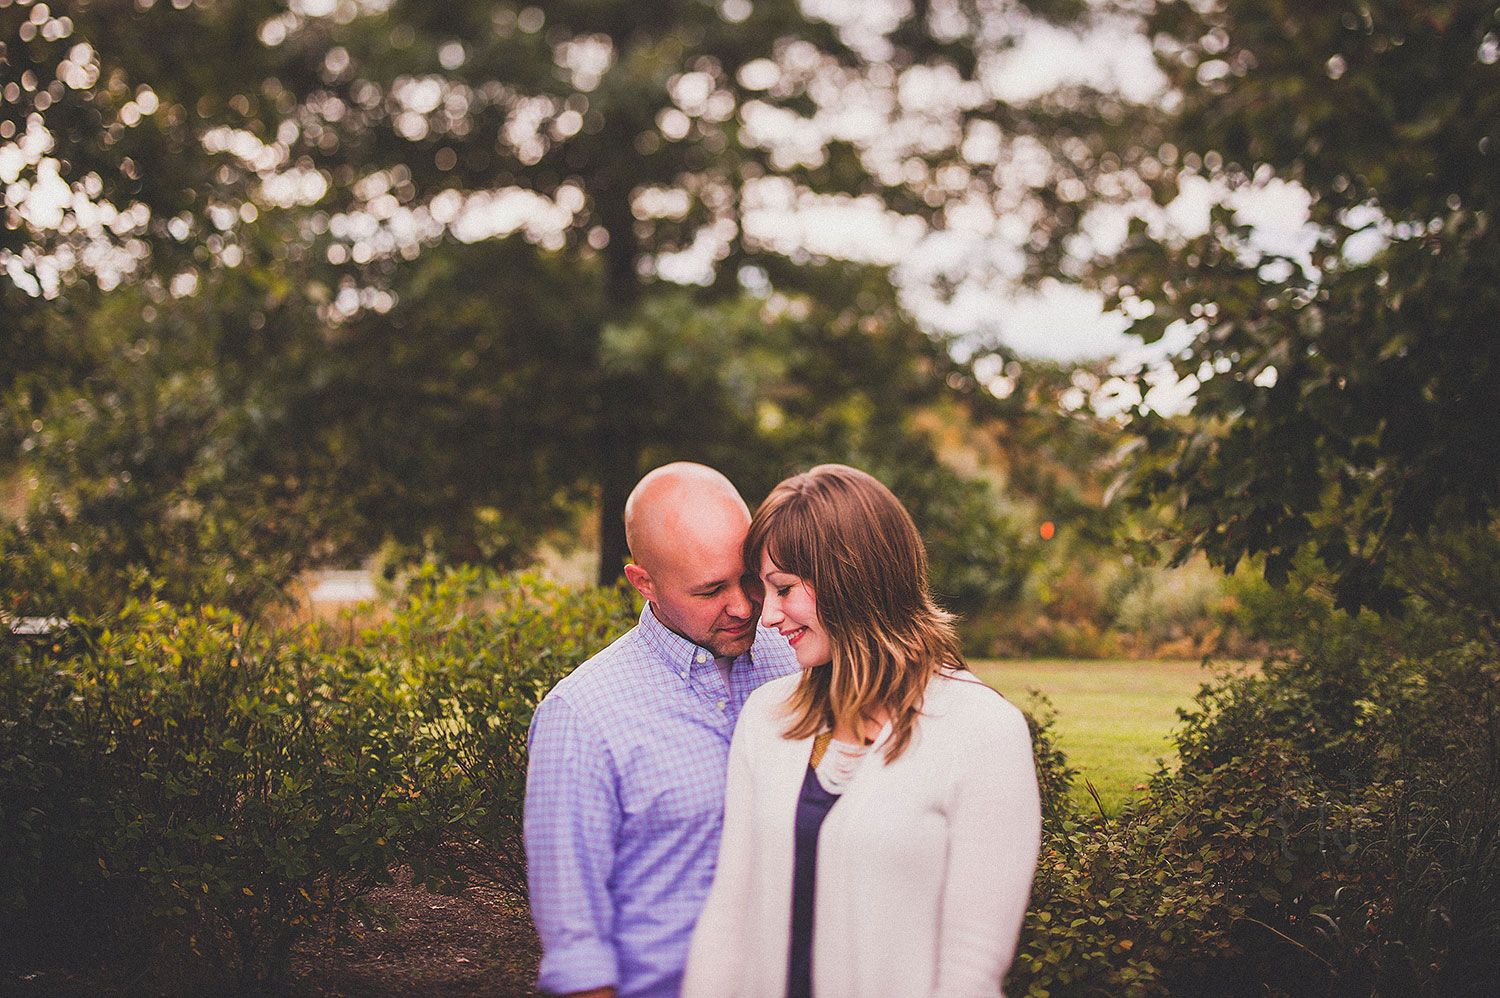 pat-robinson-photography-wilmington-engagement-session-3-2.jpg